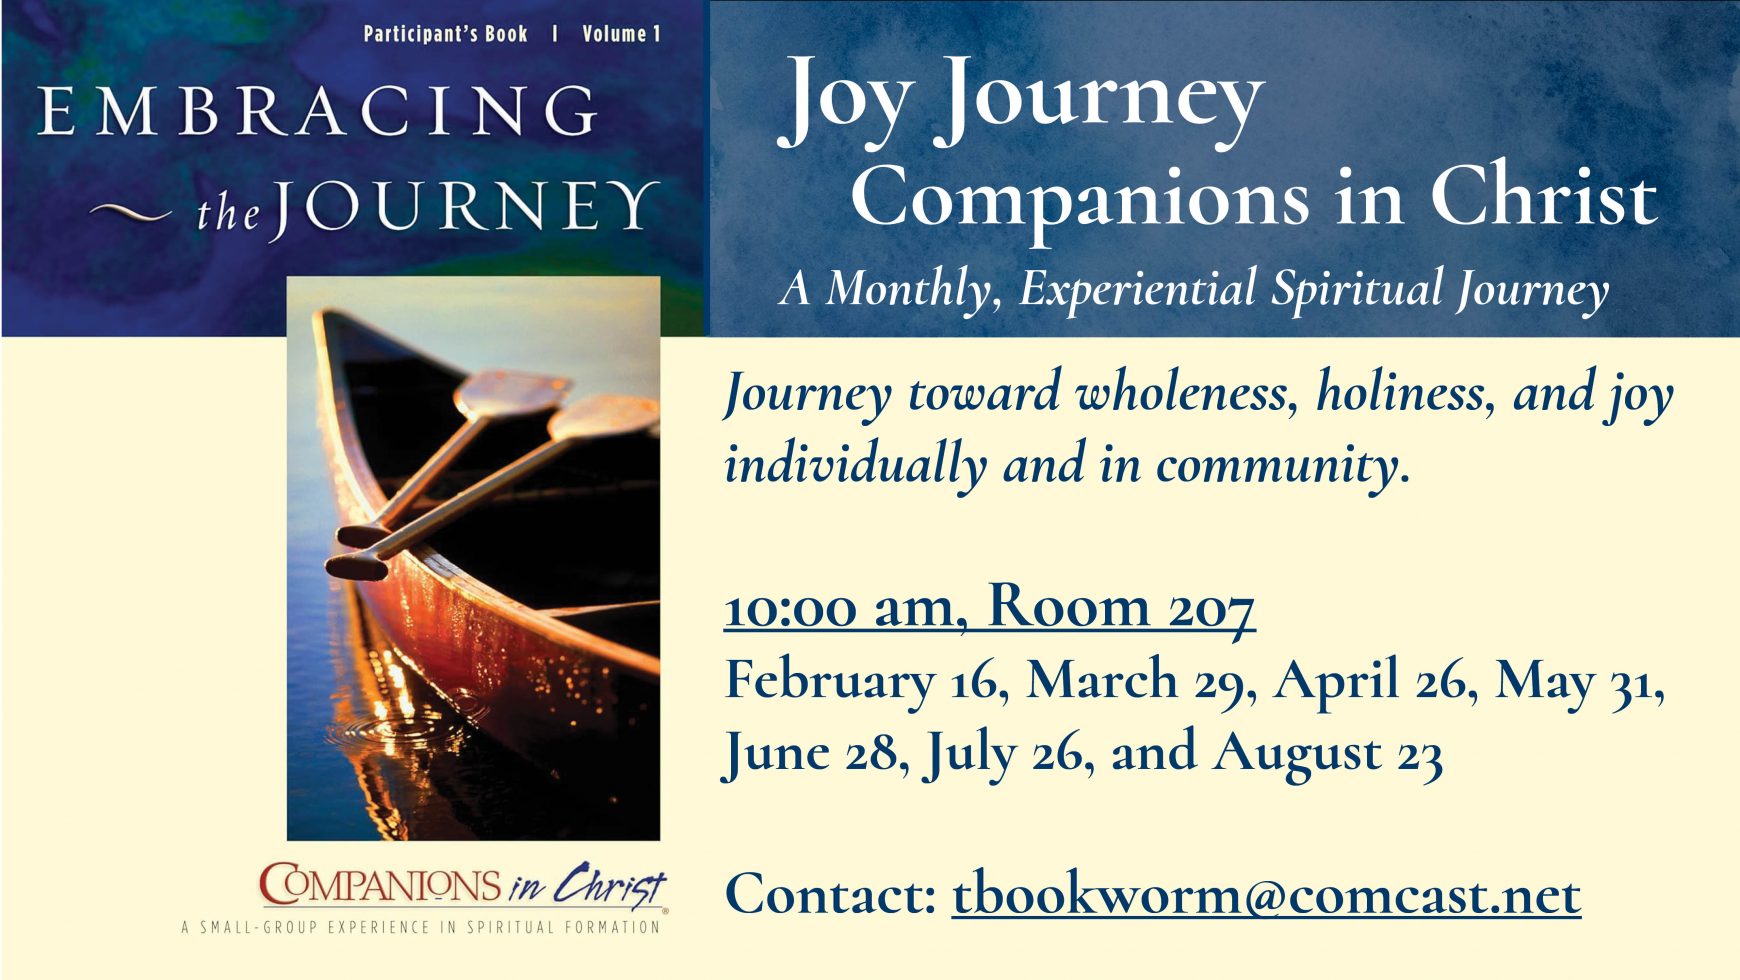 Joy Journey Companions in Christ 1, Embracing the Journey